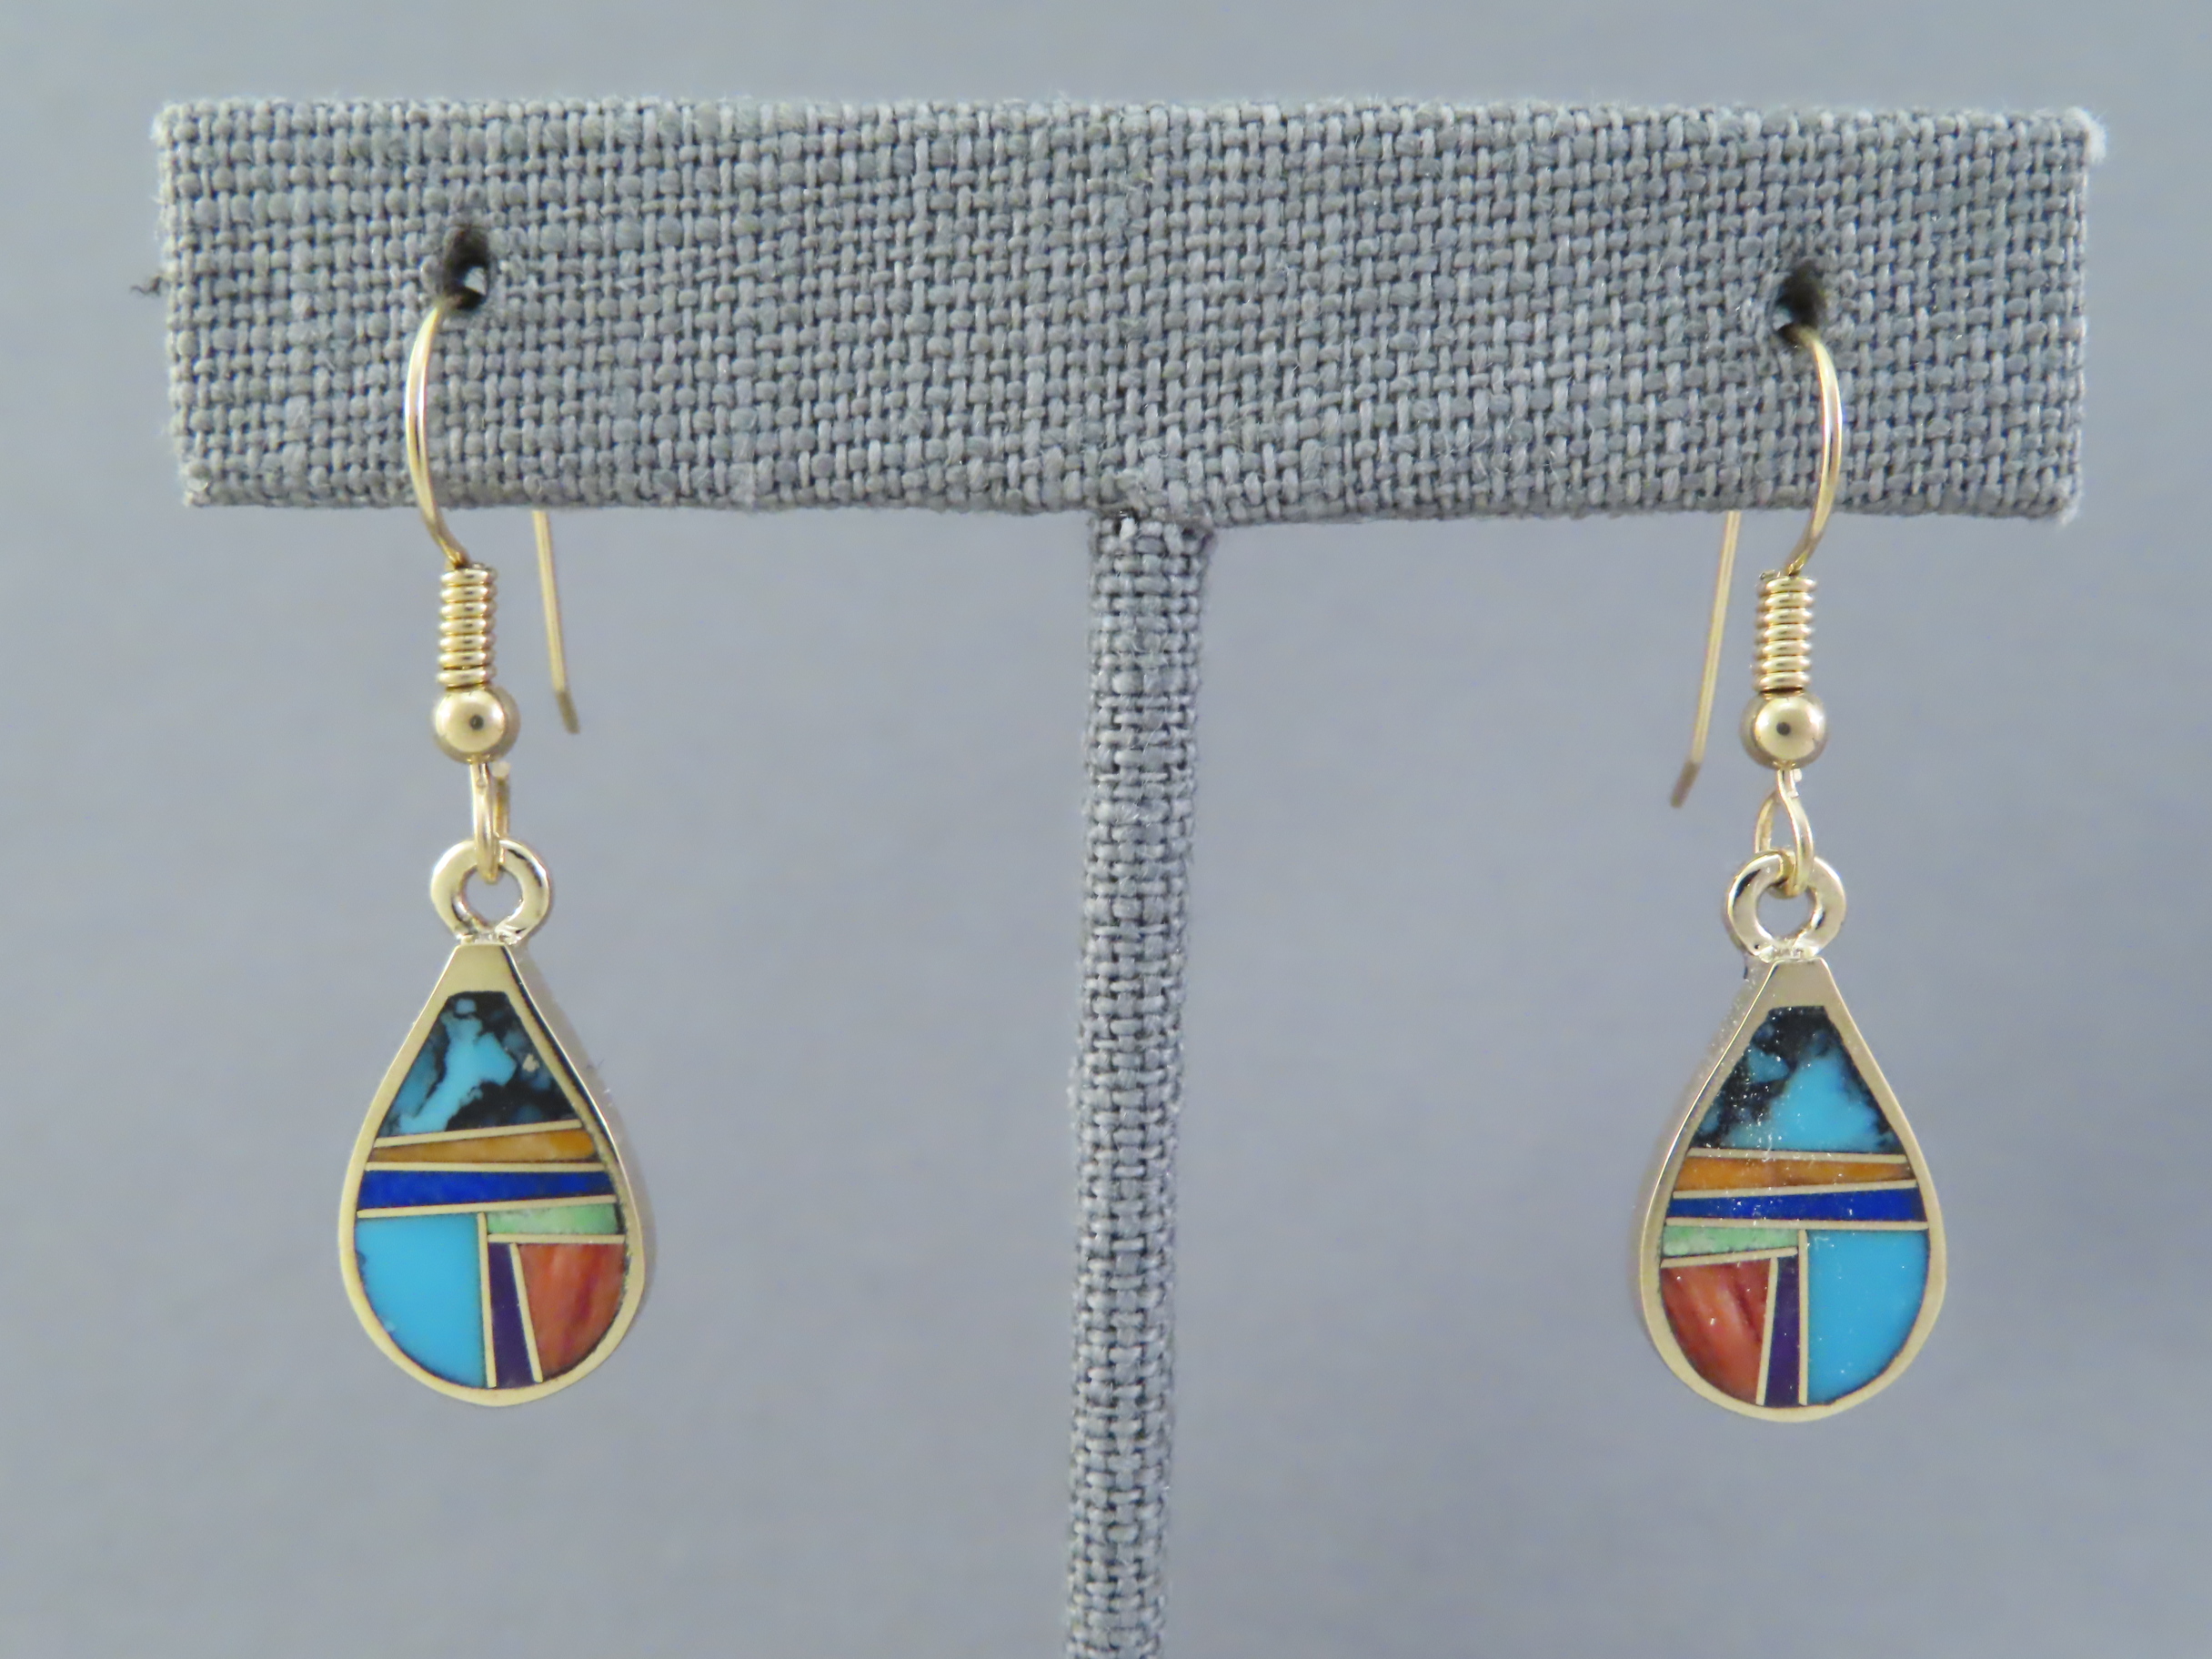 Gold Earrings - Multi-Color Inlay Earrings (teardrops) by Native American jewelry artist, Peterson Chee FOR SALE $995-